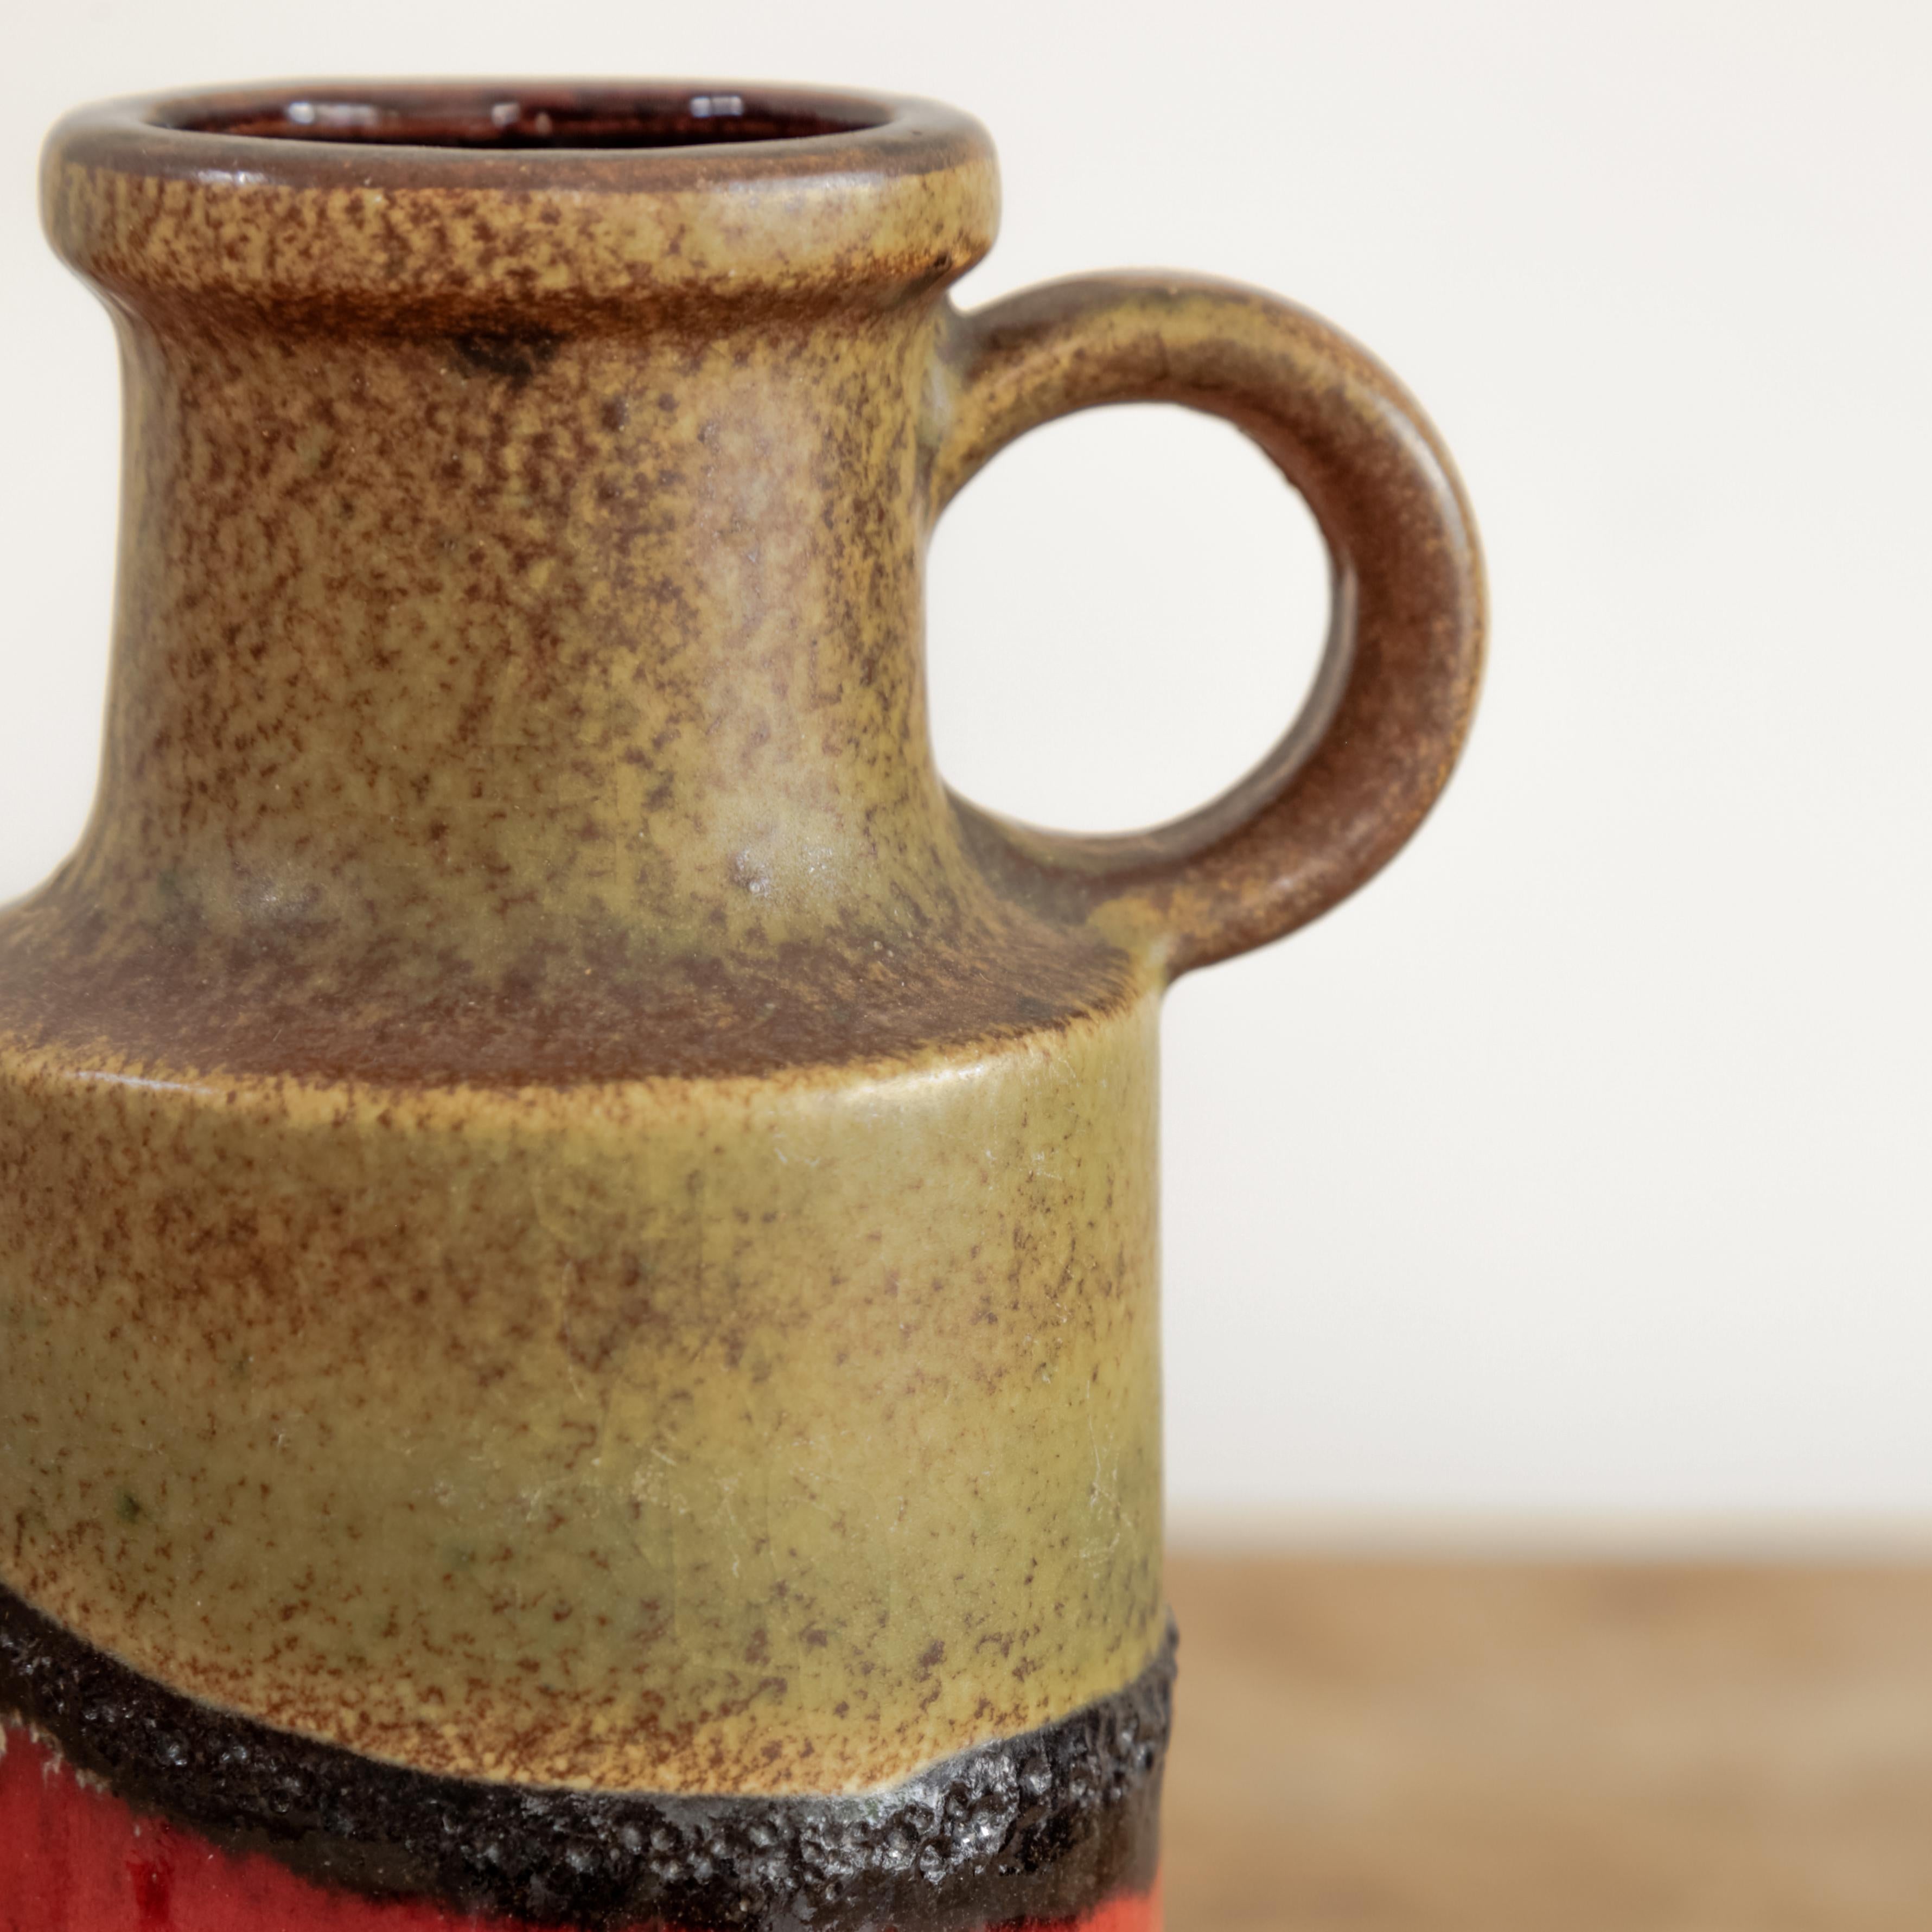 Earthy ceramic vessel 407-20 with textural brown and orange details and handle, West Germany circa 1970's. 